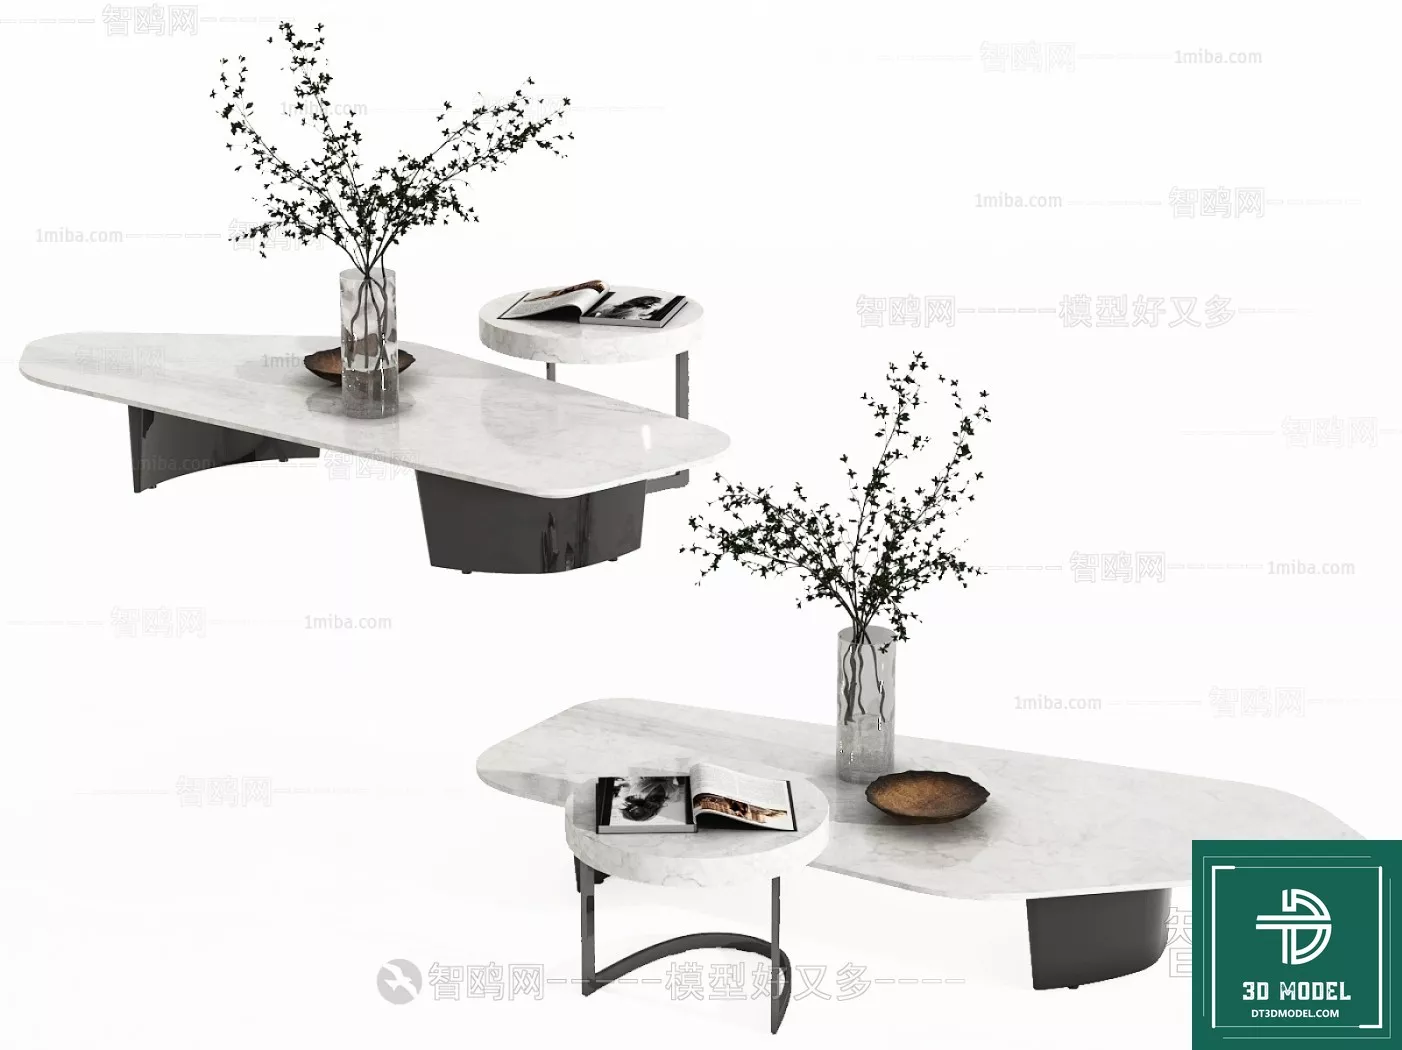 MODERN TEA TABLE - SKETCHUP 3D MODEL - VRAY OR ENSCAPE - ID14978